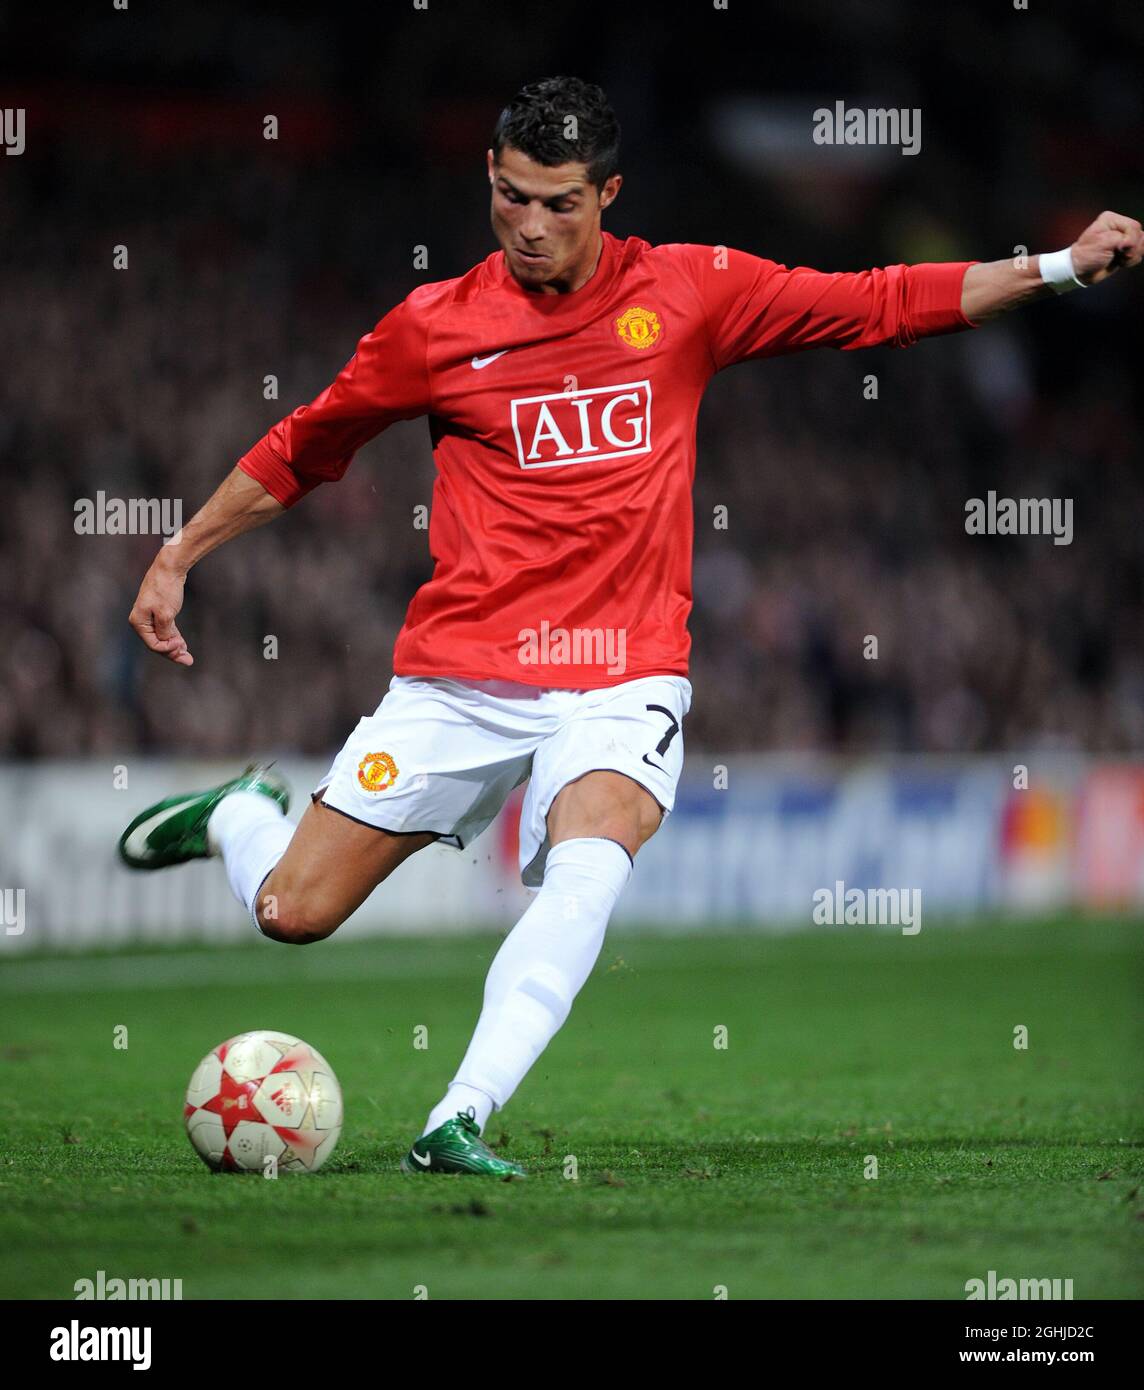 Cristiano Ronaldo of Manchester United in action during UEFA Champions  League match between Manchester United and Villarreal CF in London Stock  Photo - Alamy